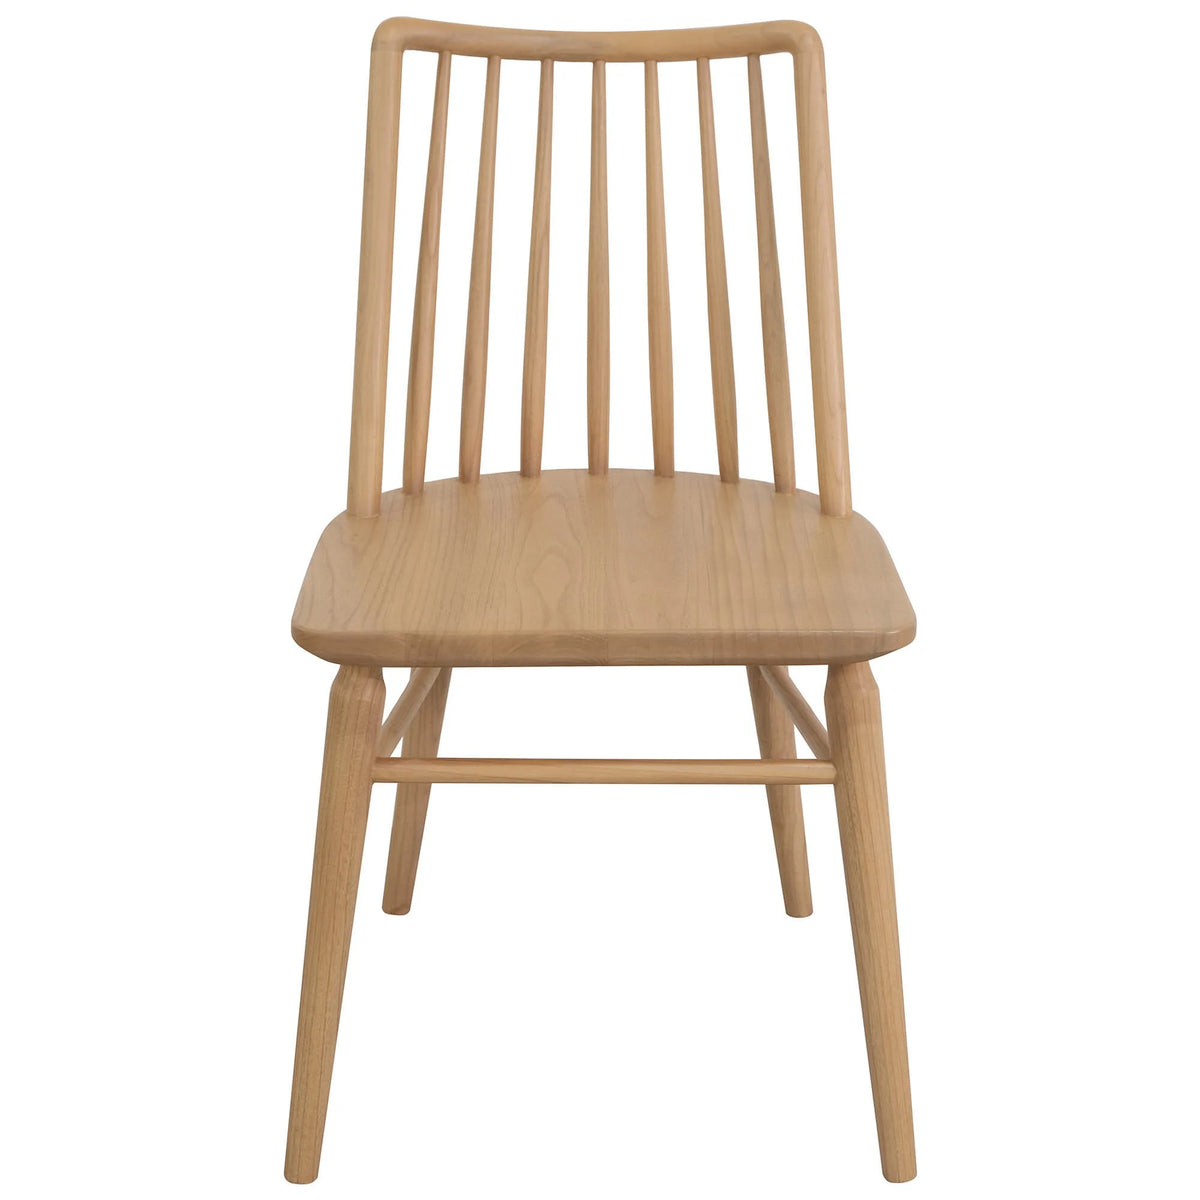 Set of 2 Riviera Solid Oak Dining Chair - Natural - Notbrand